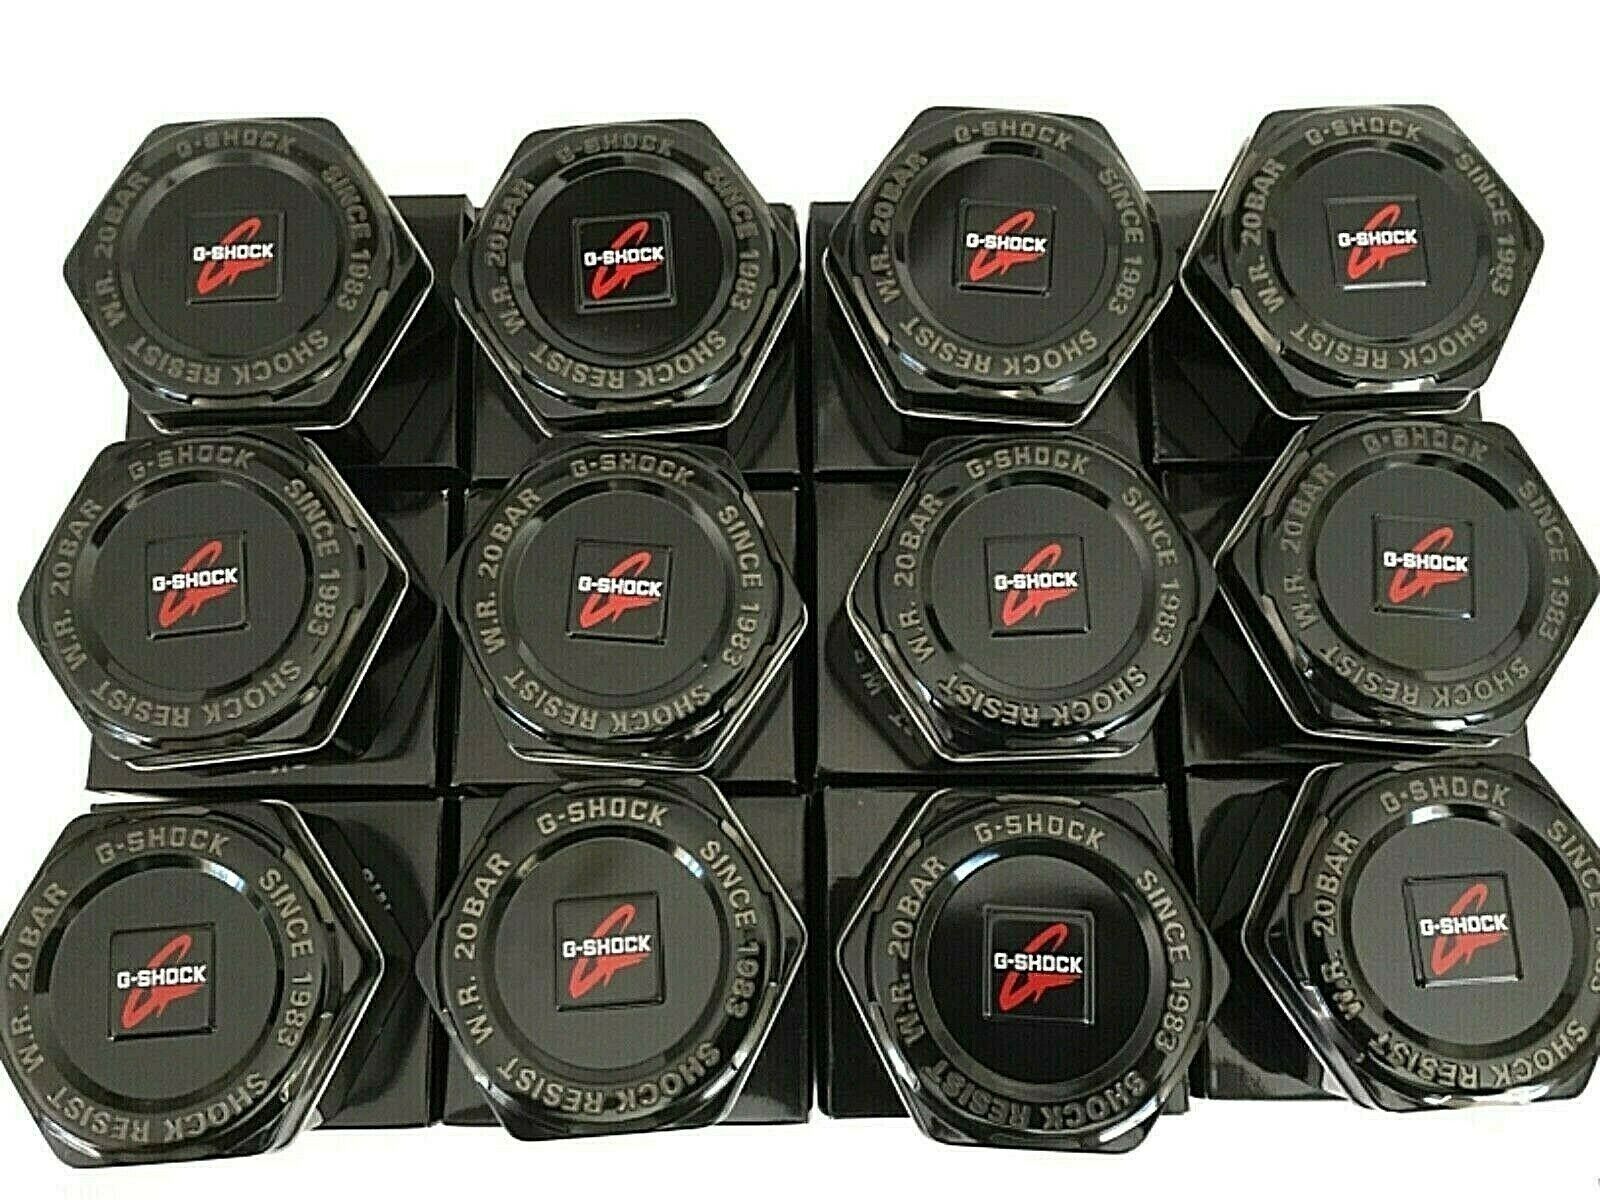 Set of 12 Original G-Shock Empty Watch Tin Boxes with 12 Warranty Cards Casio G-Shock